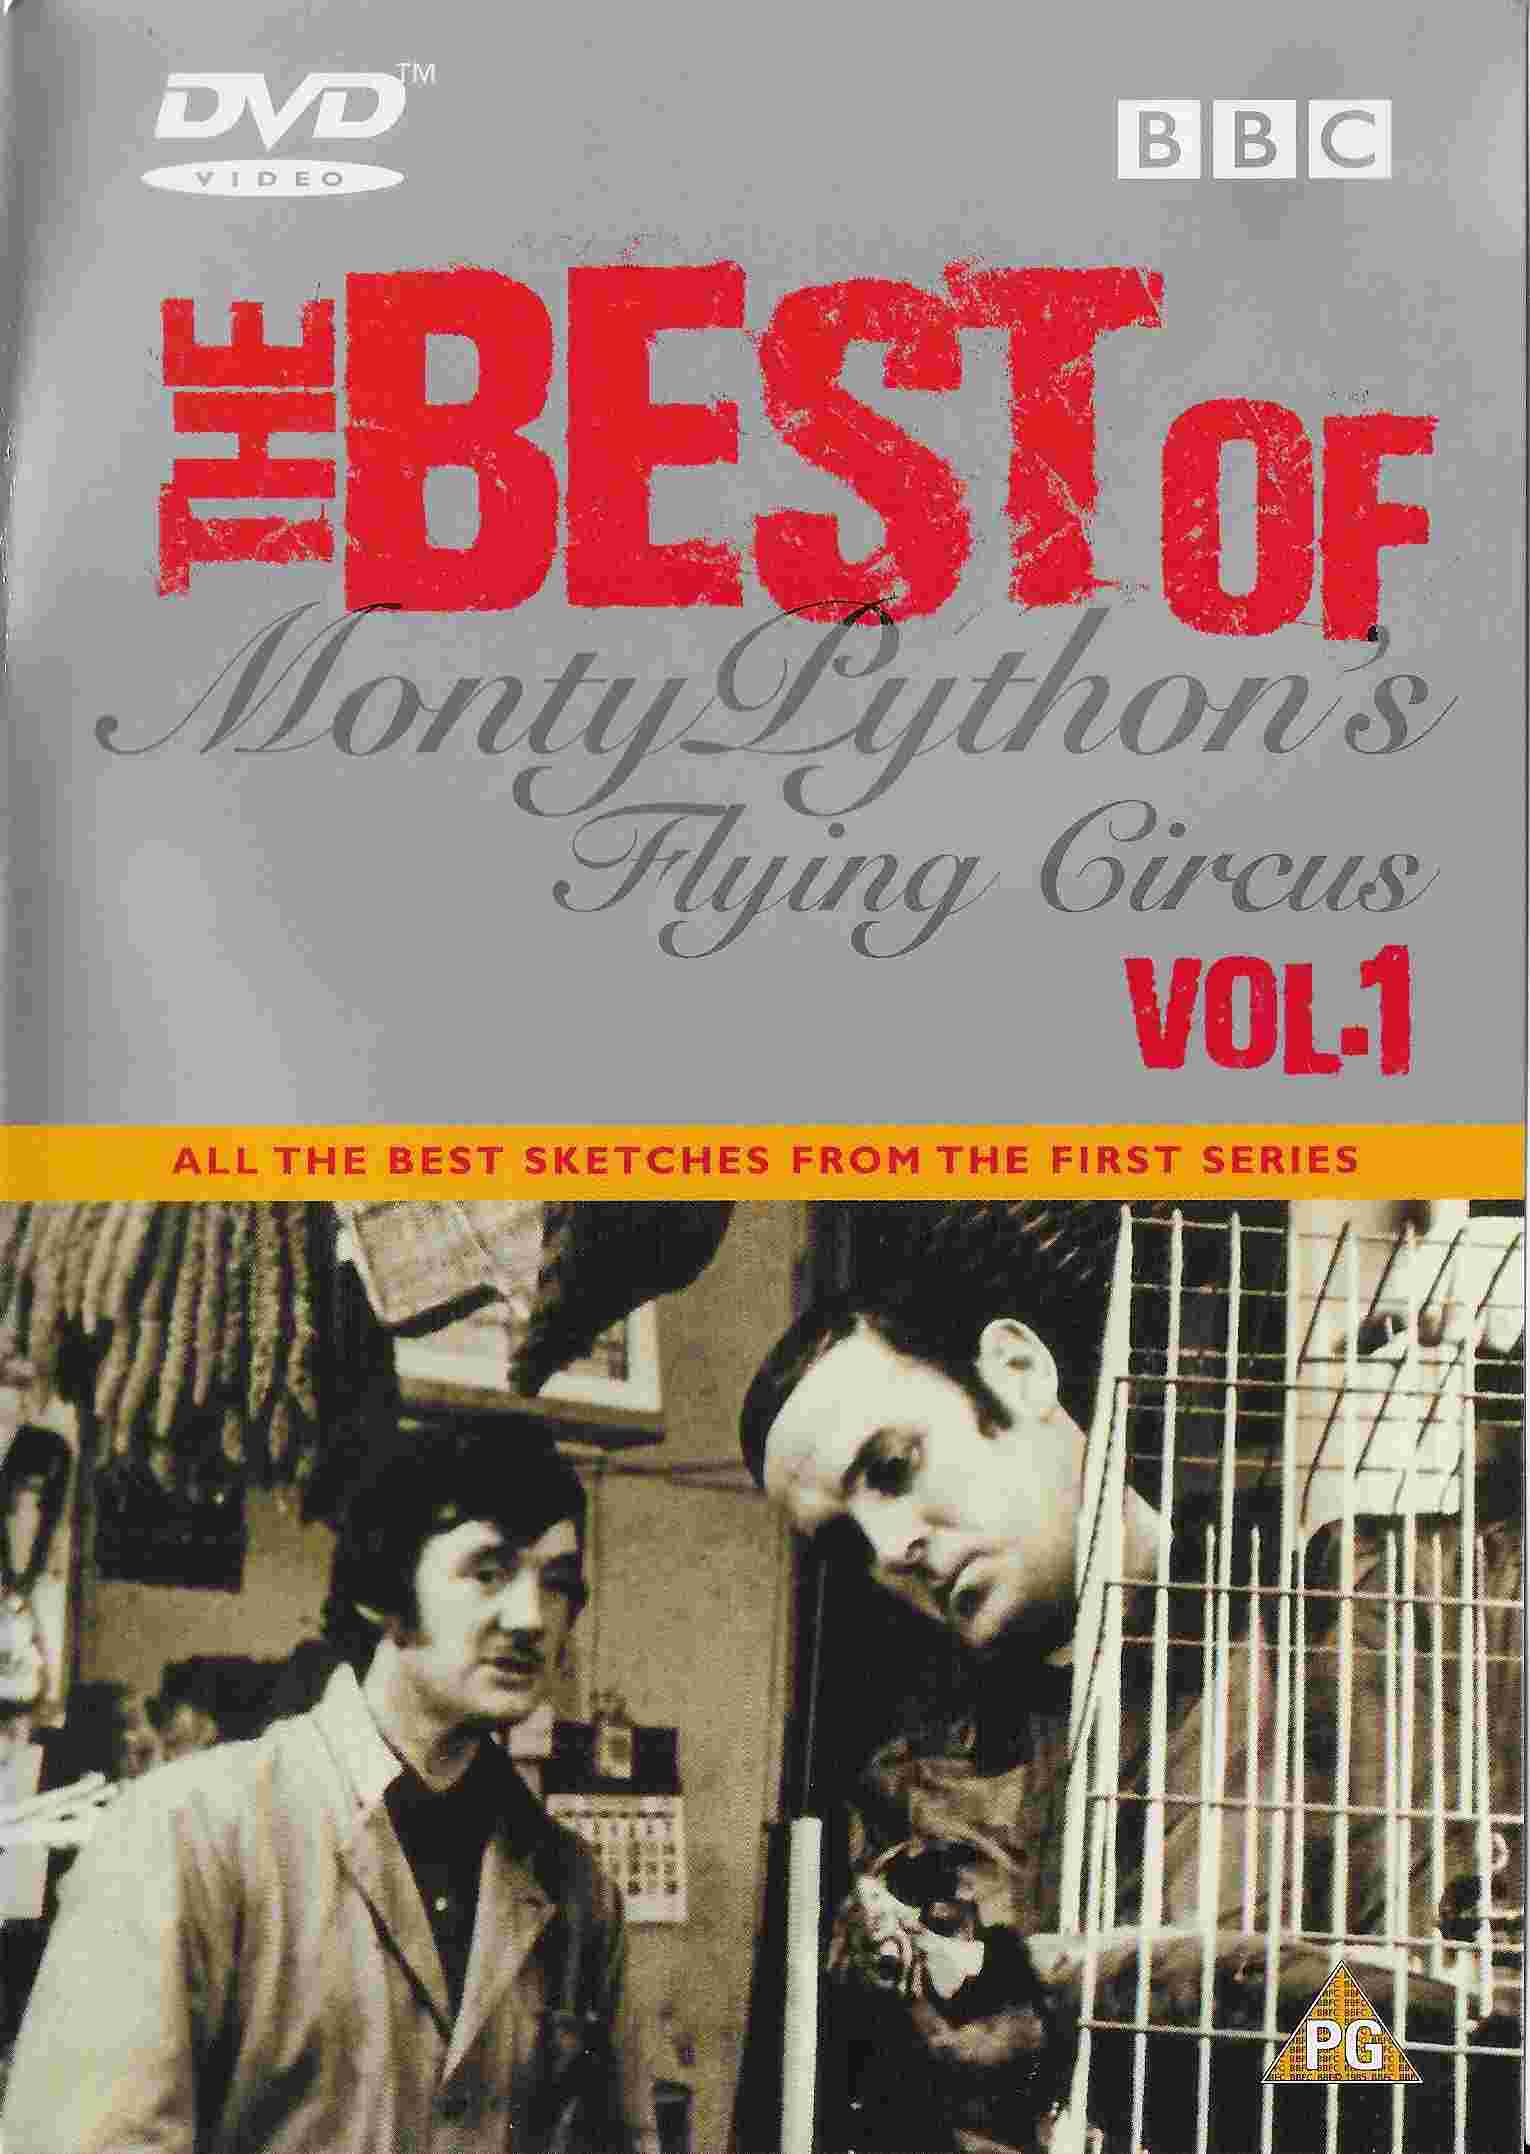 Picture of BBCDVD 1005 The best of Monty Python's flying circus - Volume 1 by artist Monty Python